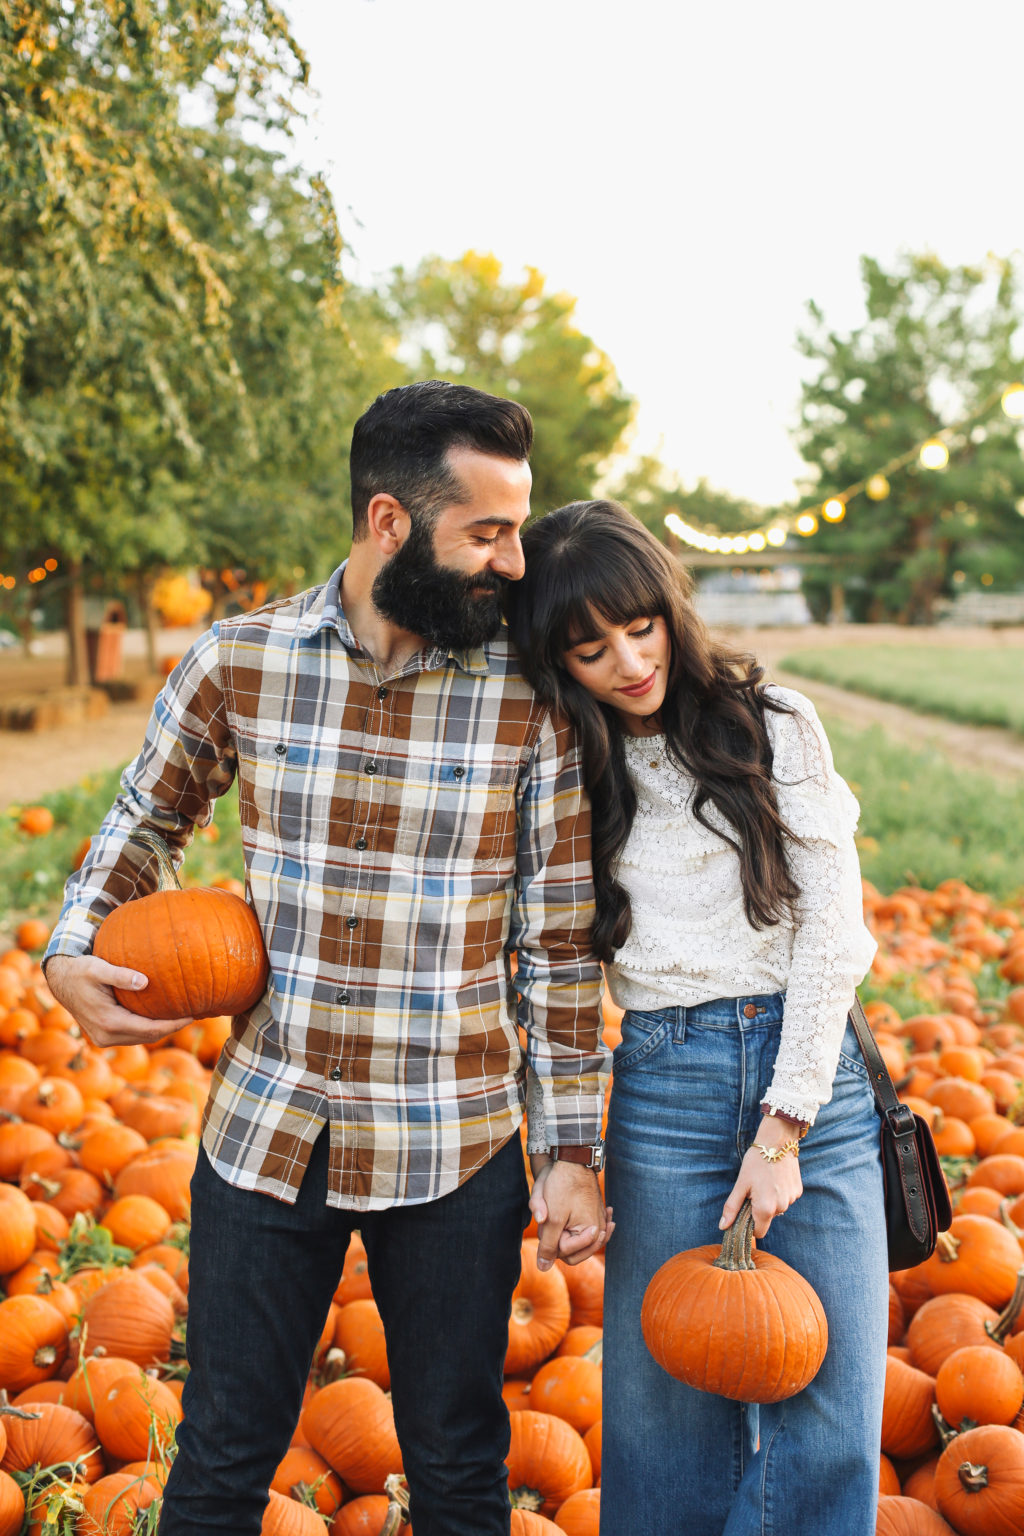 Pumpkin Picking Outfit Ideas for Couples